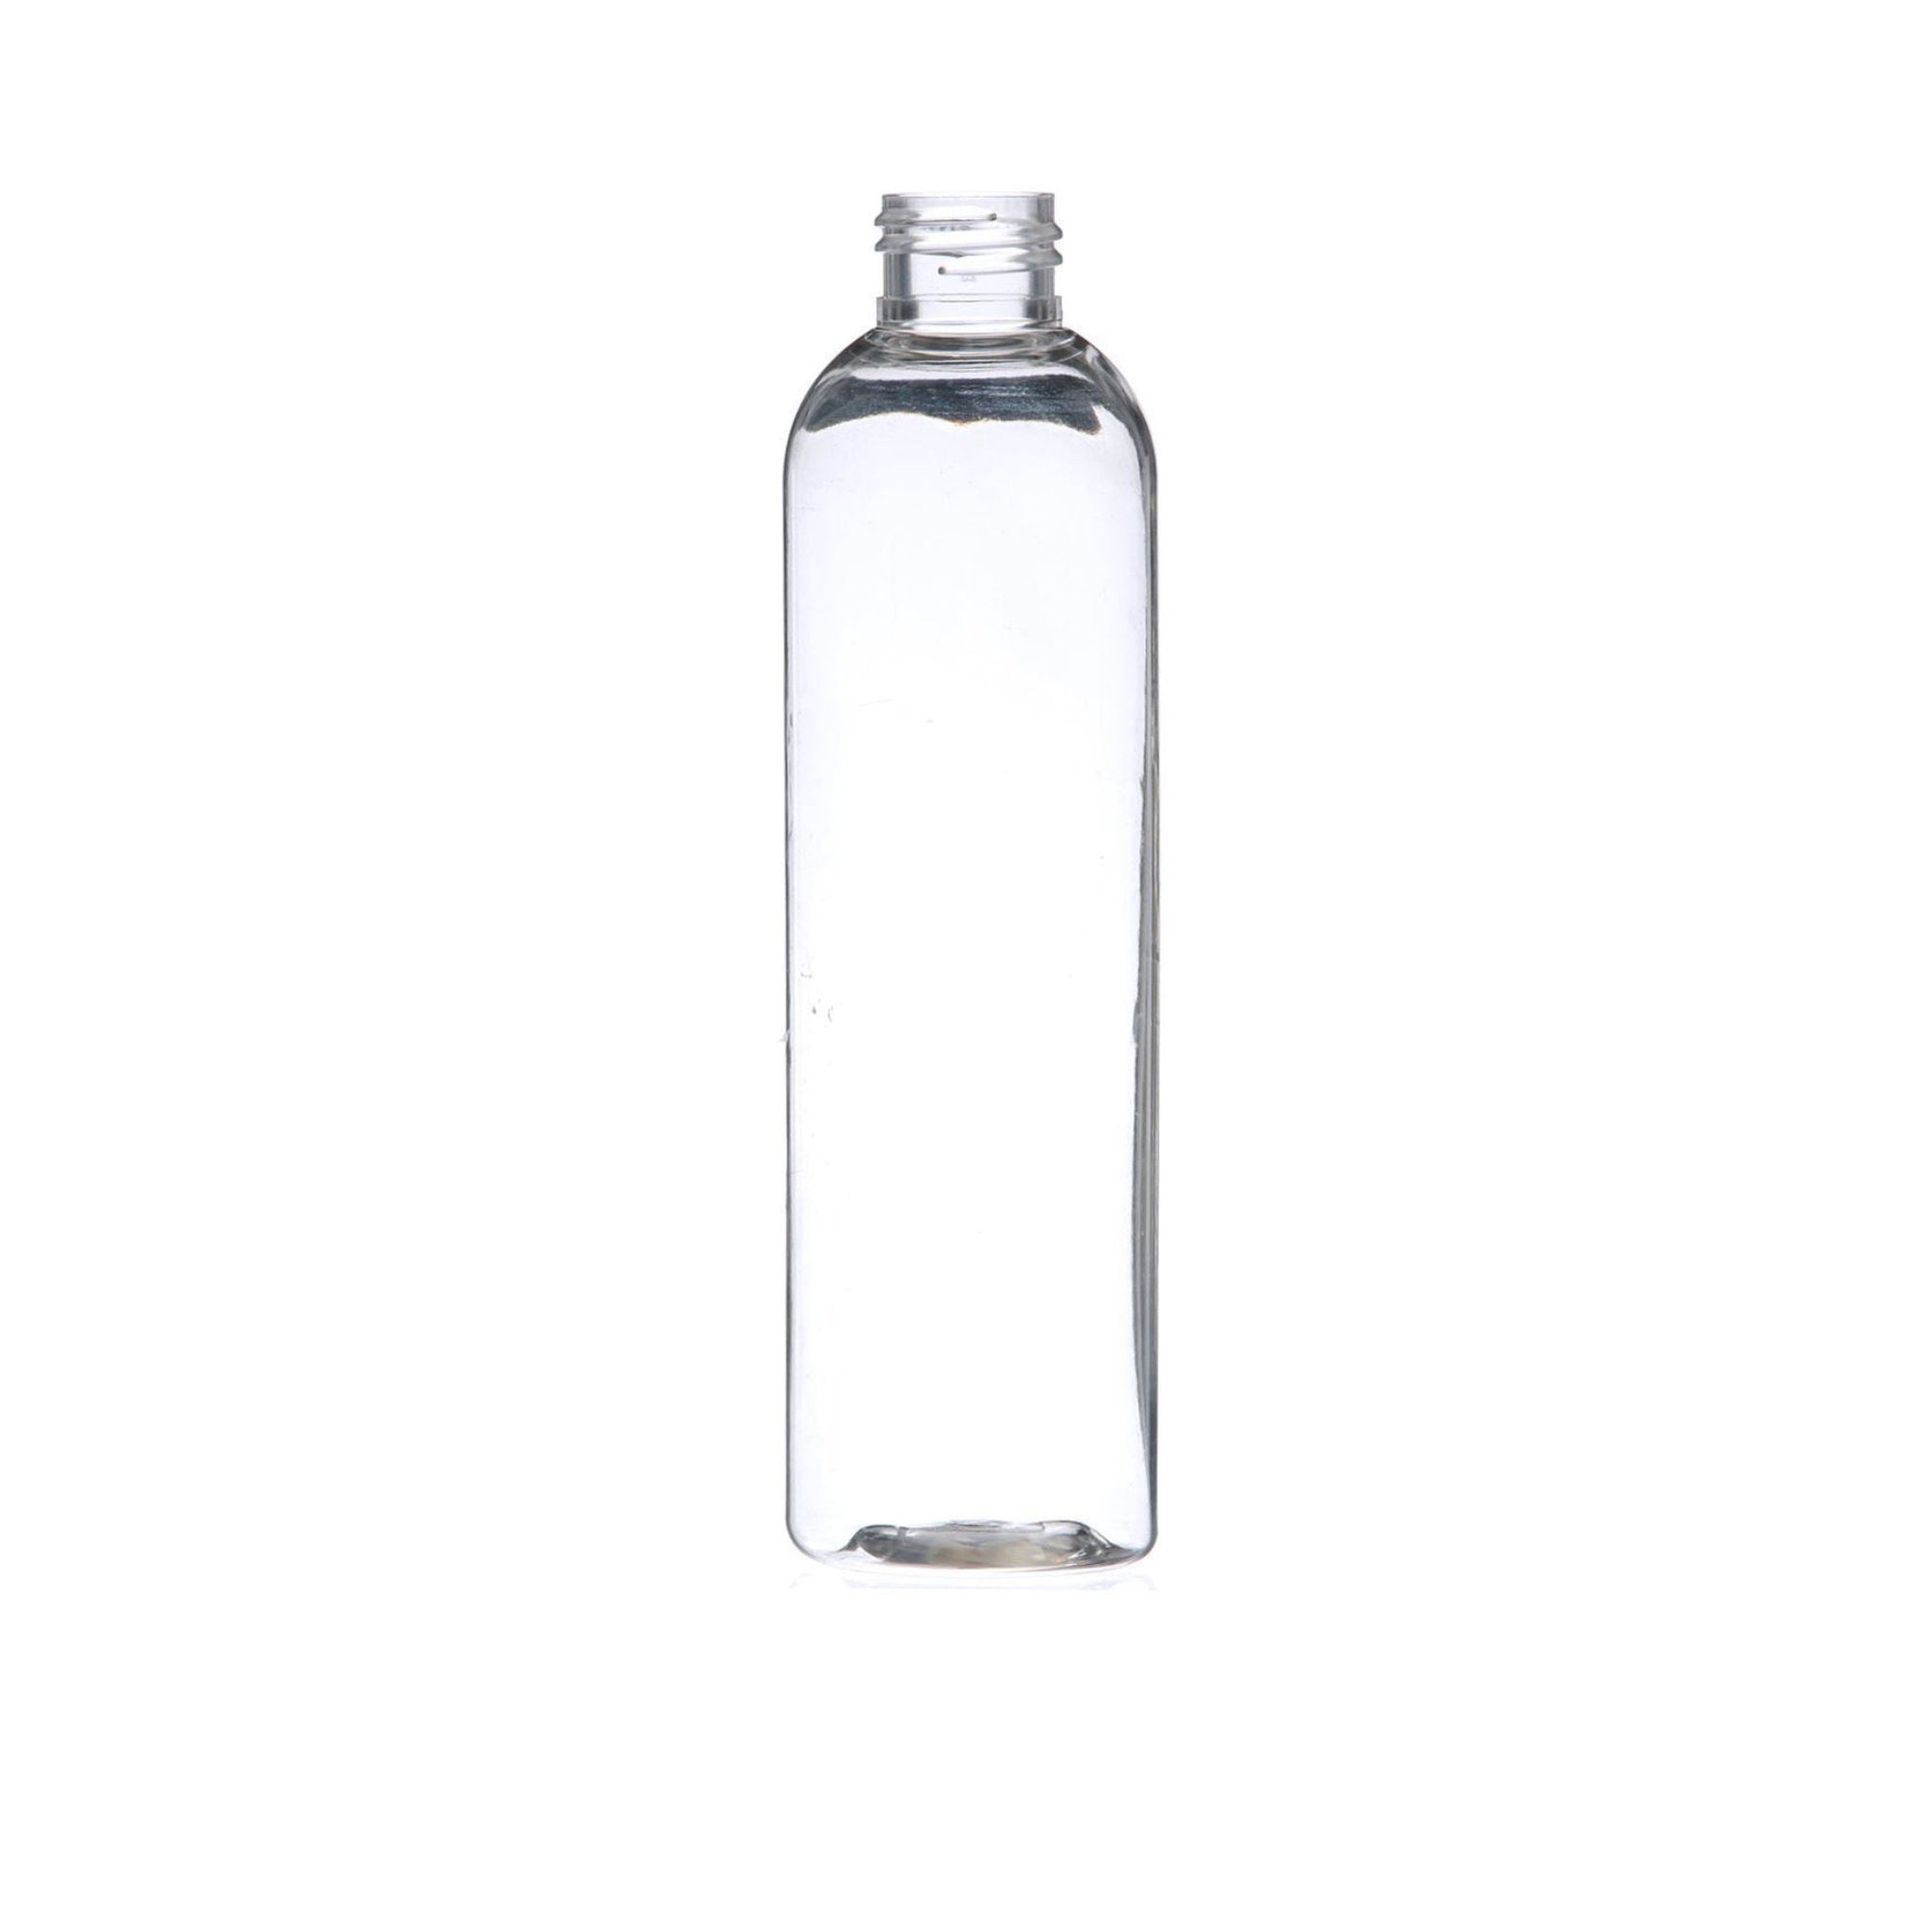 PET Bullet Bottle - Clear - 8 oz. - The Flaming Candle Company